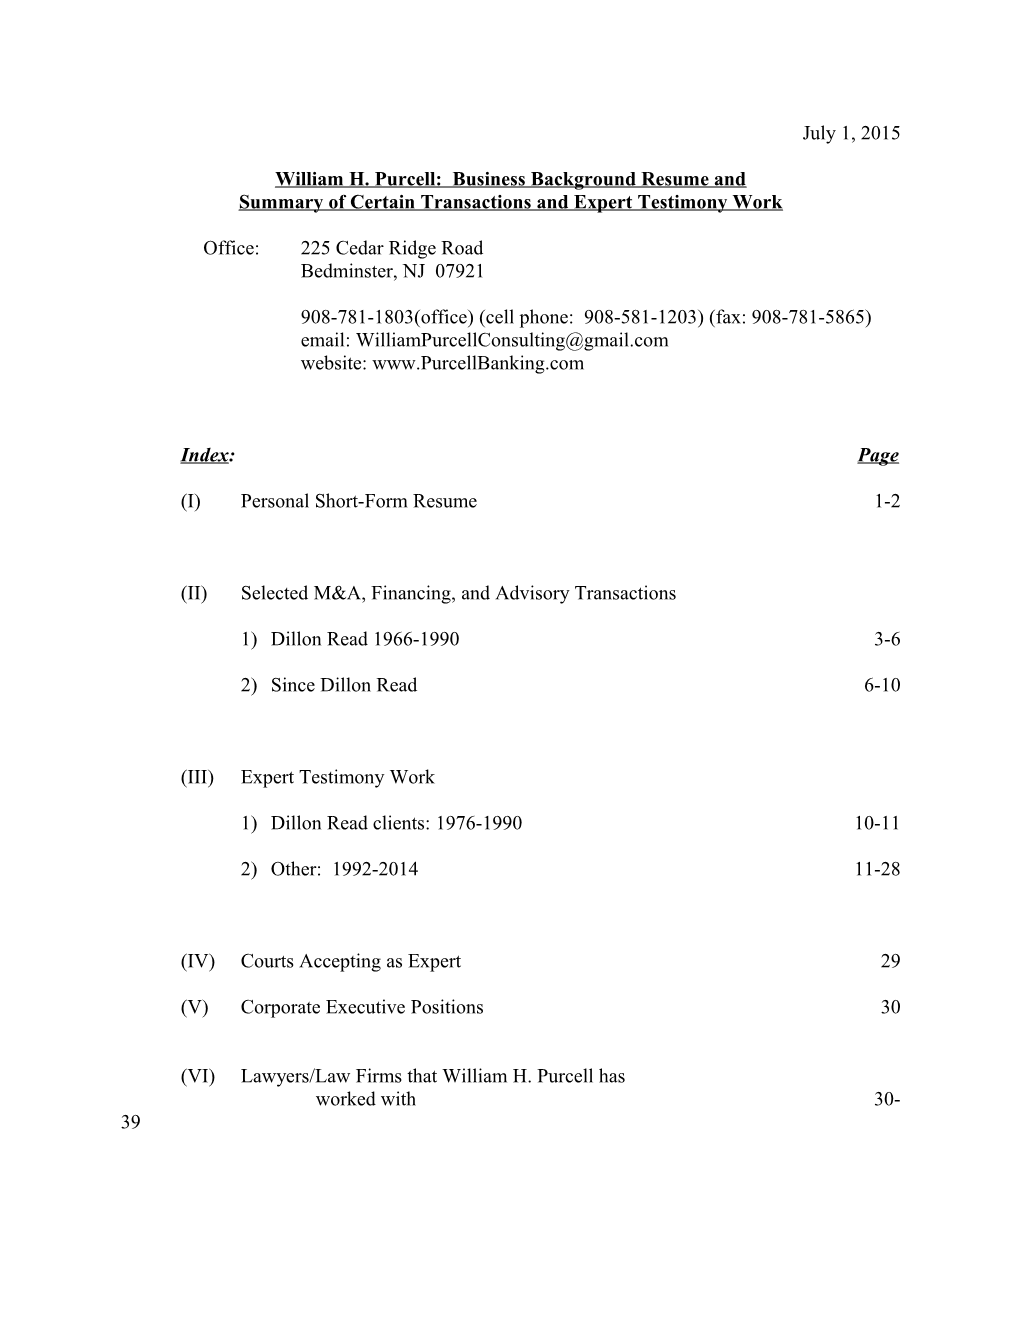 William H. Purcell: Business Background Resume And